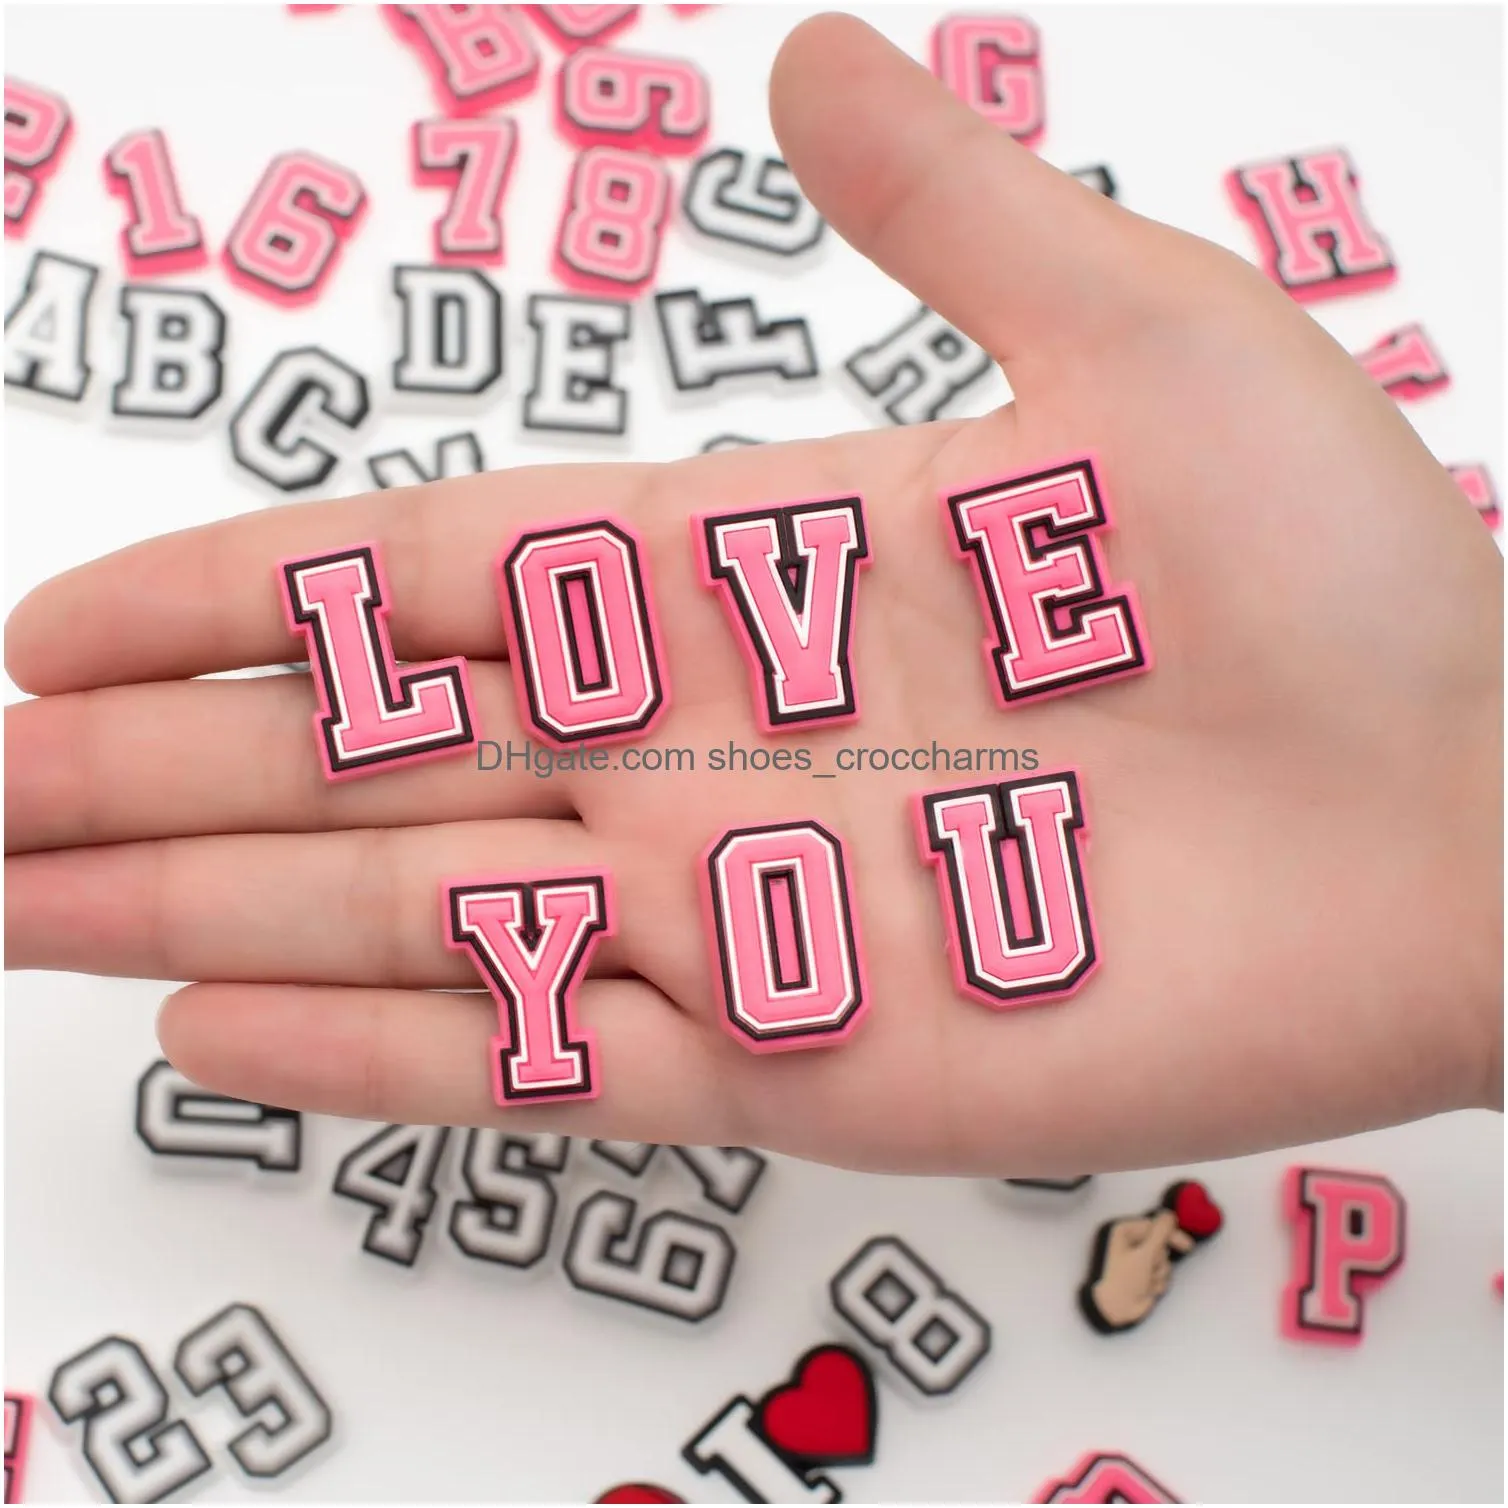 Croc Pink Croc Charms PVC Letter Pack For Shoes, Clogs, Sandals, And  Bracelets Stylish Wristband Decoration For Teens, Boys, Girls, Men, Women,  Otszp From Dhfycharms, $0.07